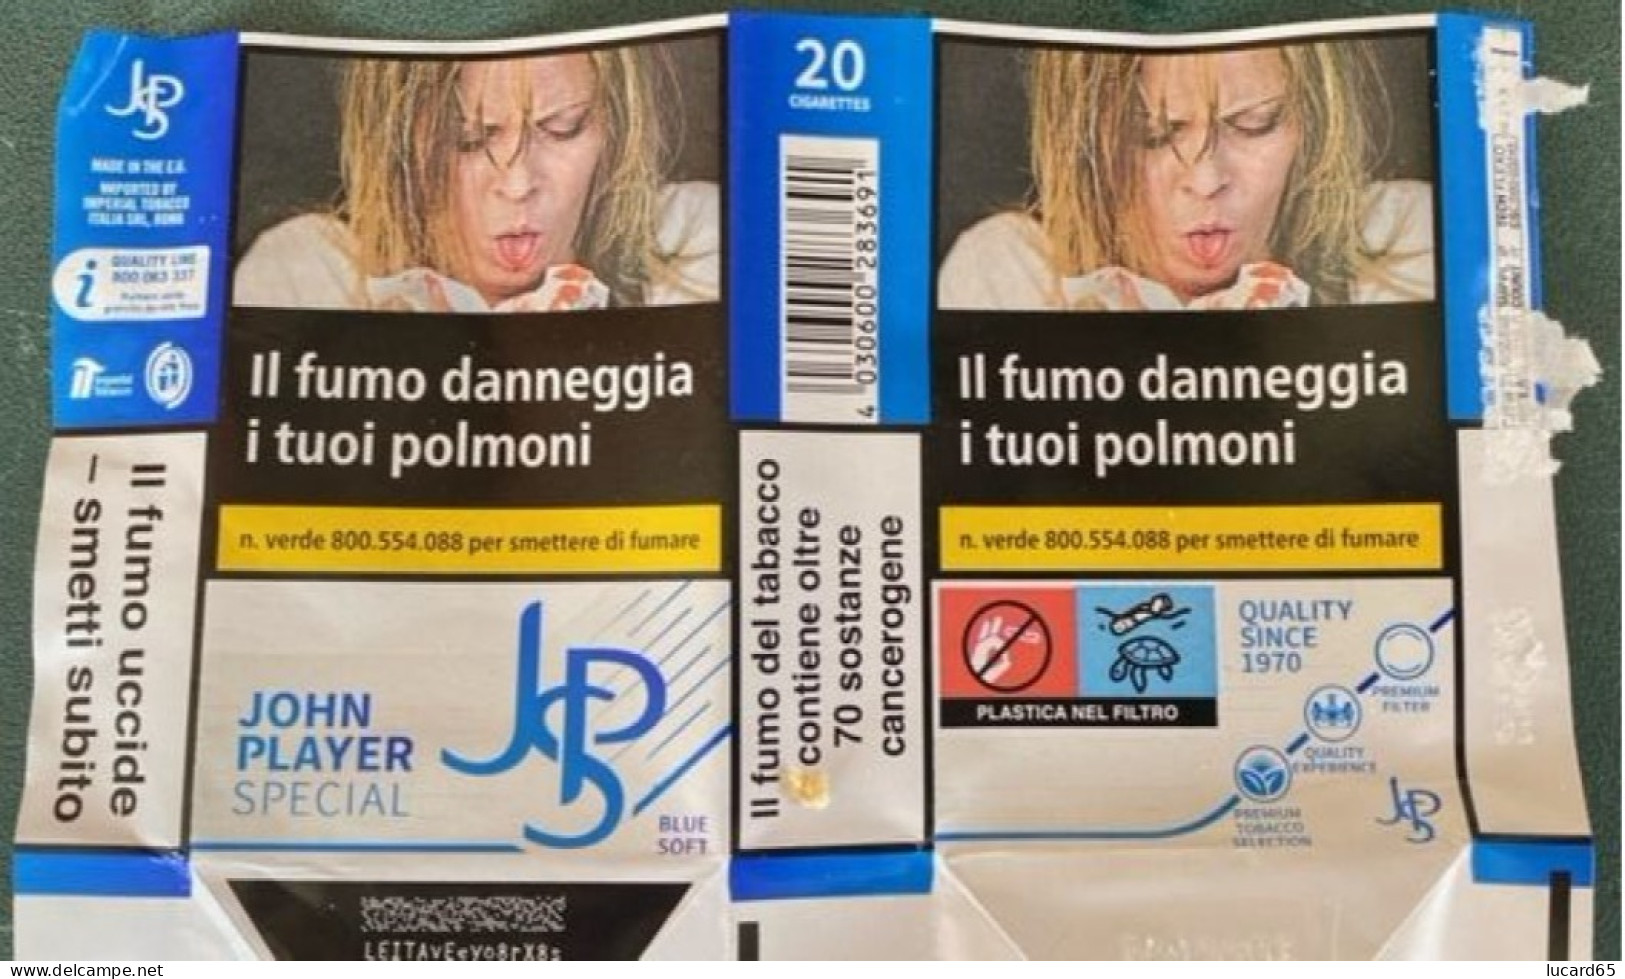 TABACCO - COLLECTORS -  JPS BLUE - JOHN PLAYER SPECIAL EMPTY SOFT PACK ITALY - - Empty Tobacco Boxes